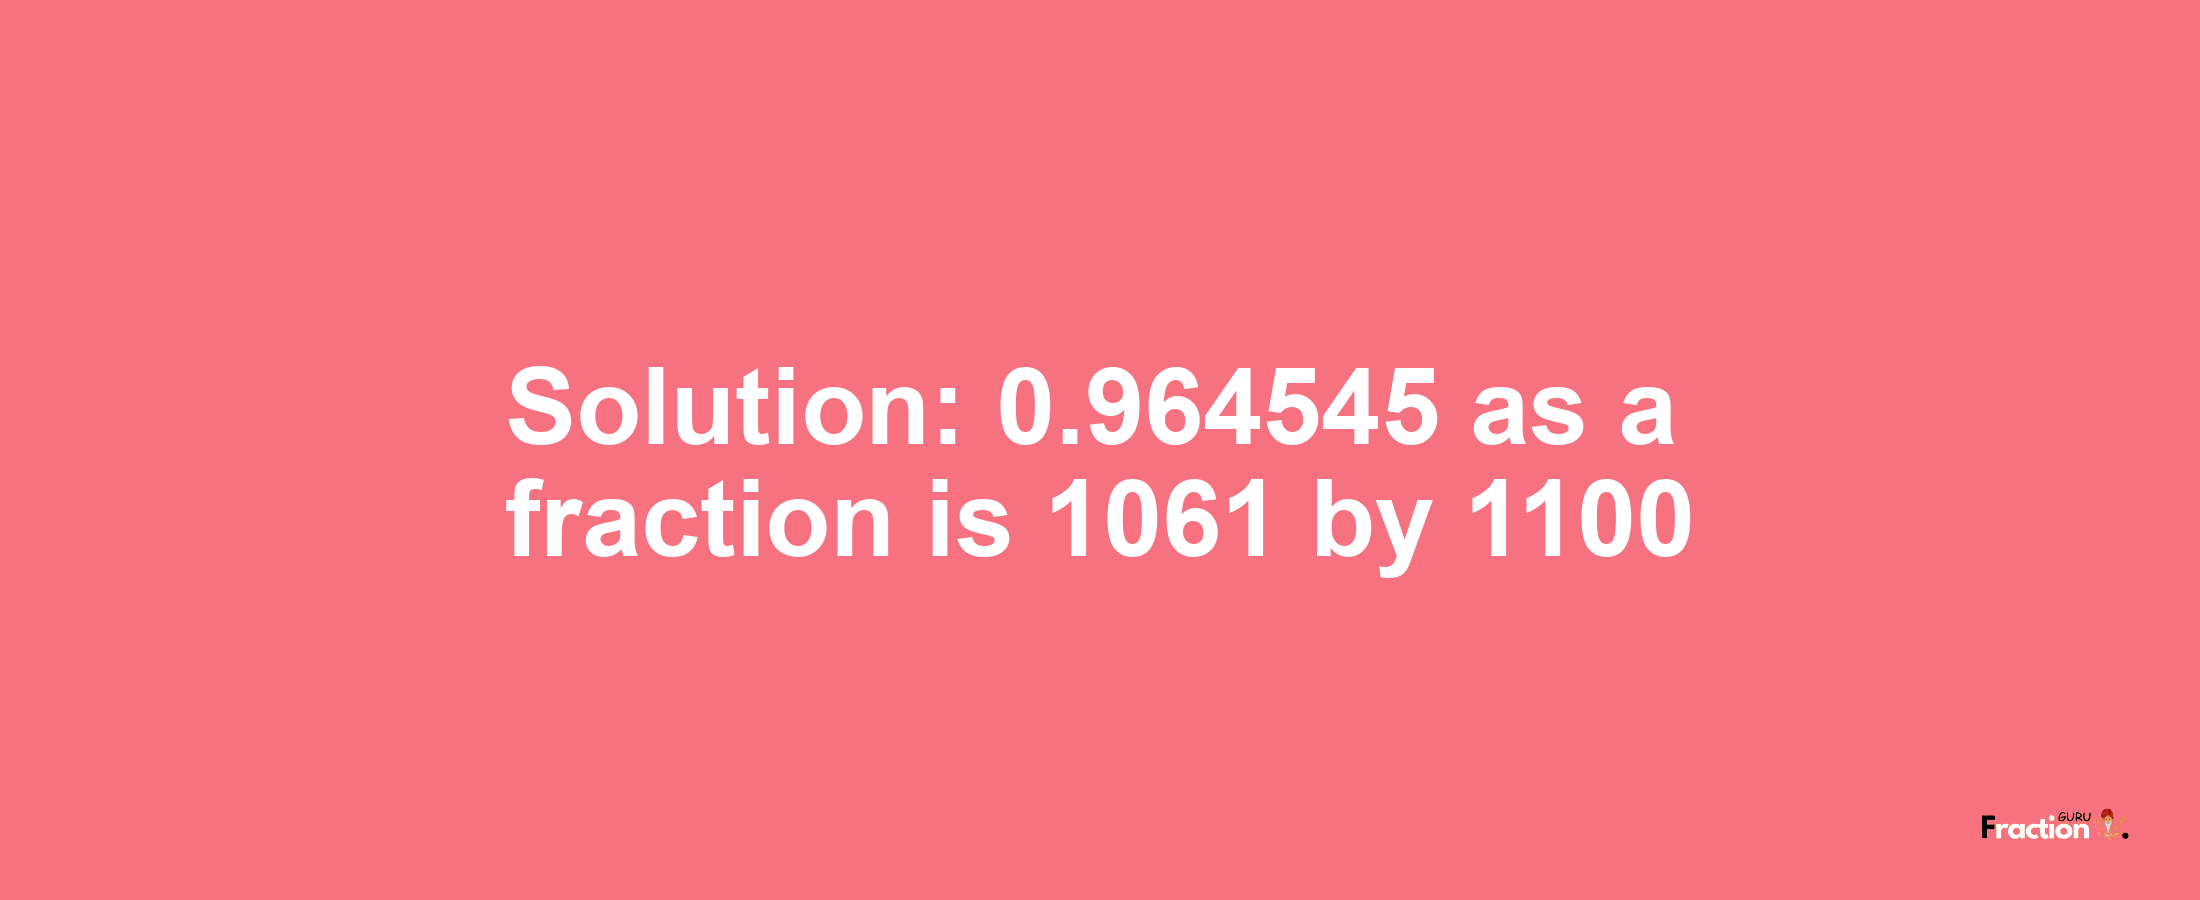 Solution:0.964545 as a fraction is 1061/1100